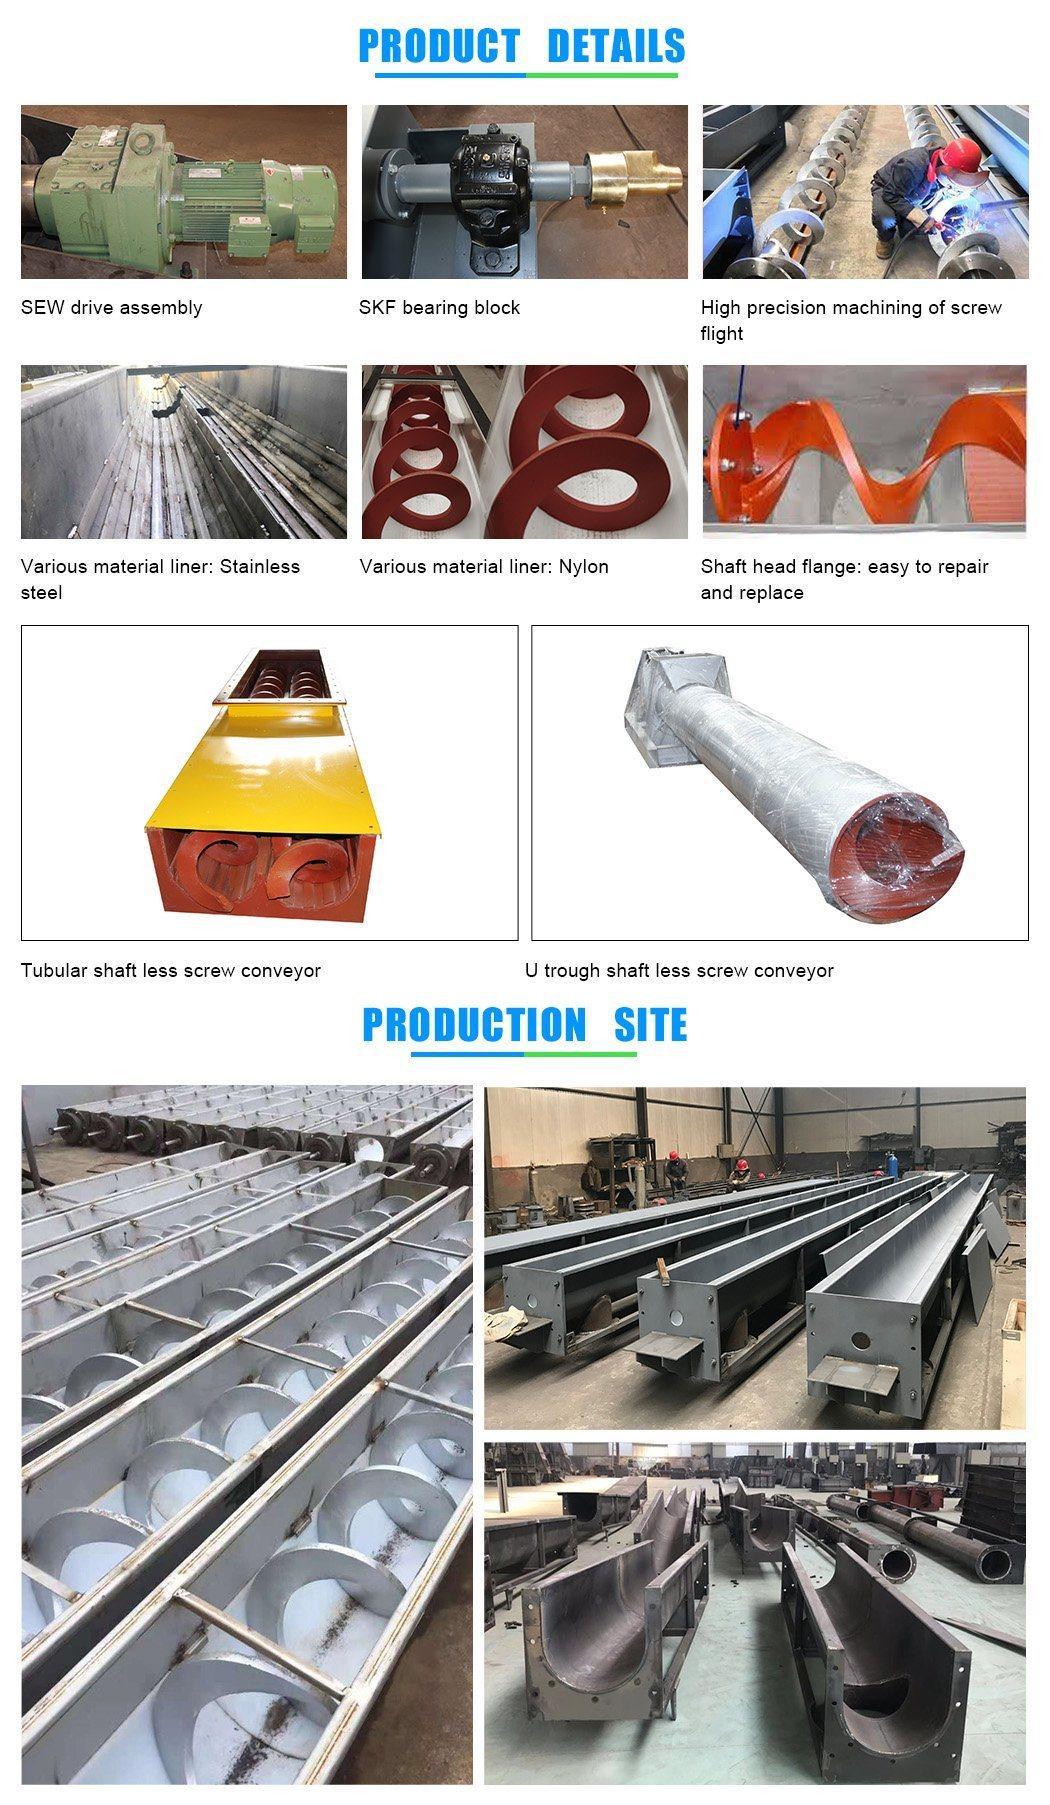 Heat-Resistant Shaftless Spiral Conveyor for Heating or Cooling Products